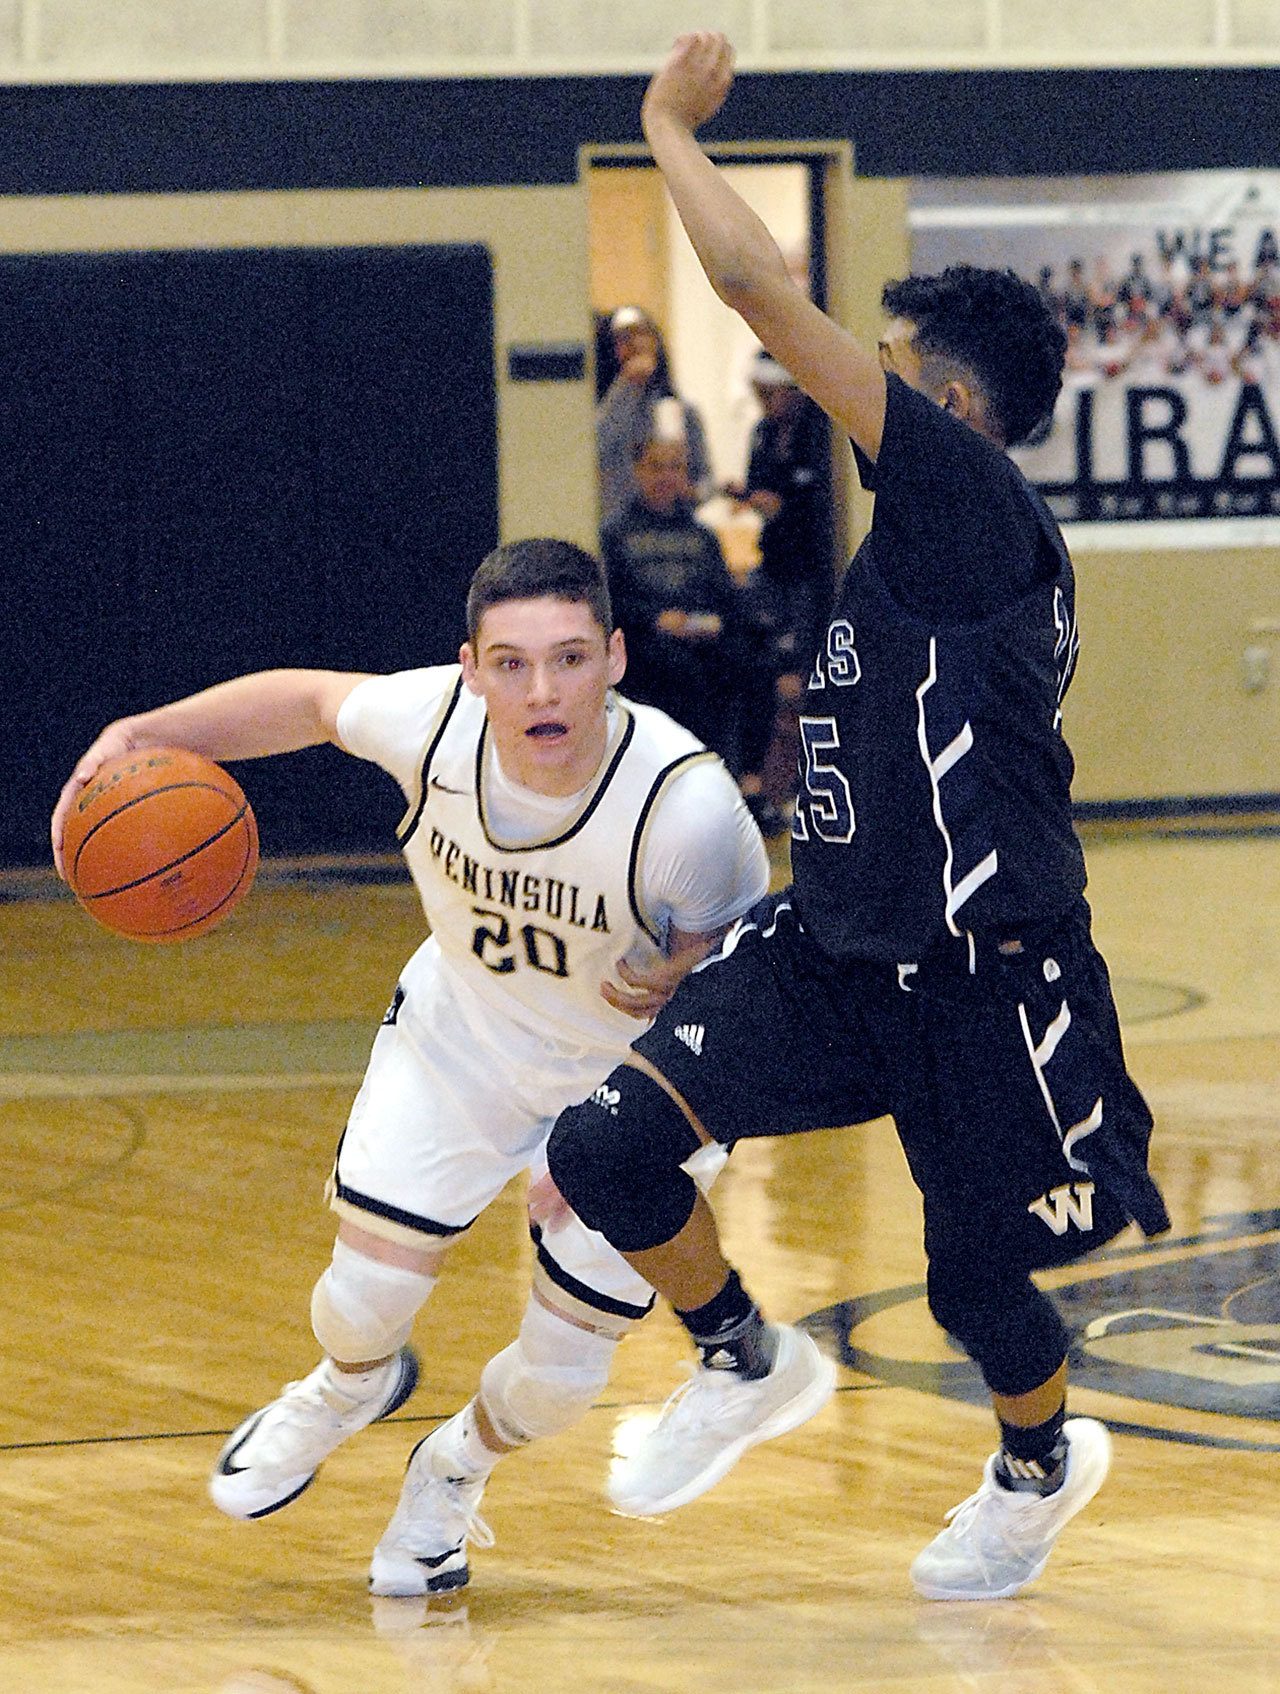 Keith Thorpe/Peninsula Daily News Peninsula’s Cole Rabedeaux, left, drives past Whatcom’s Dante Lewis in first-half action on Wednesday in Port Angeles.